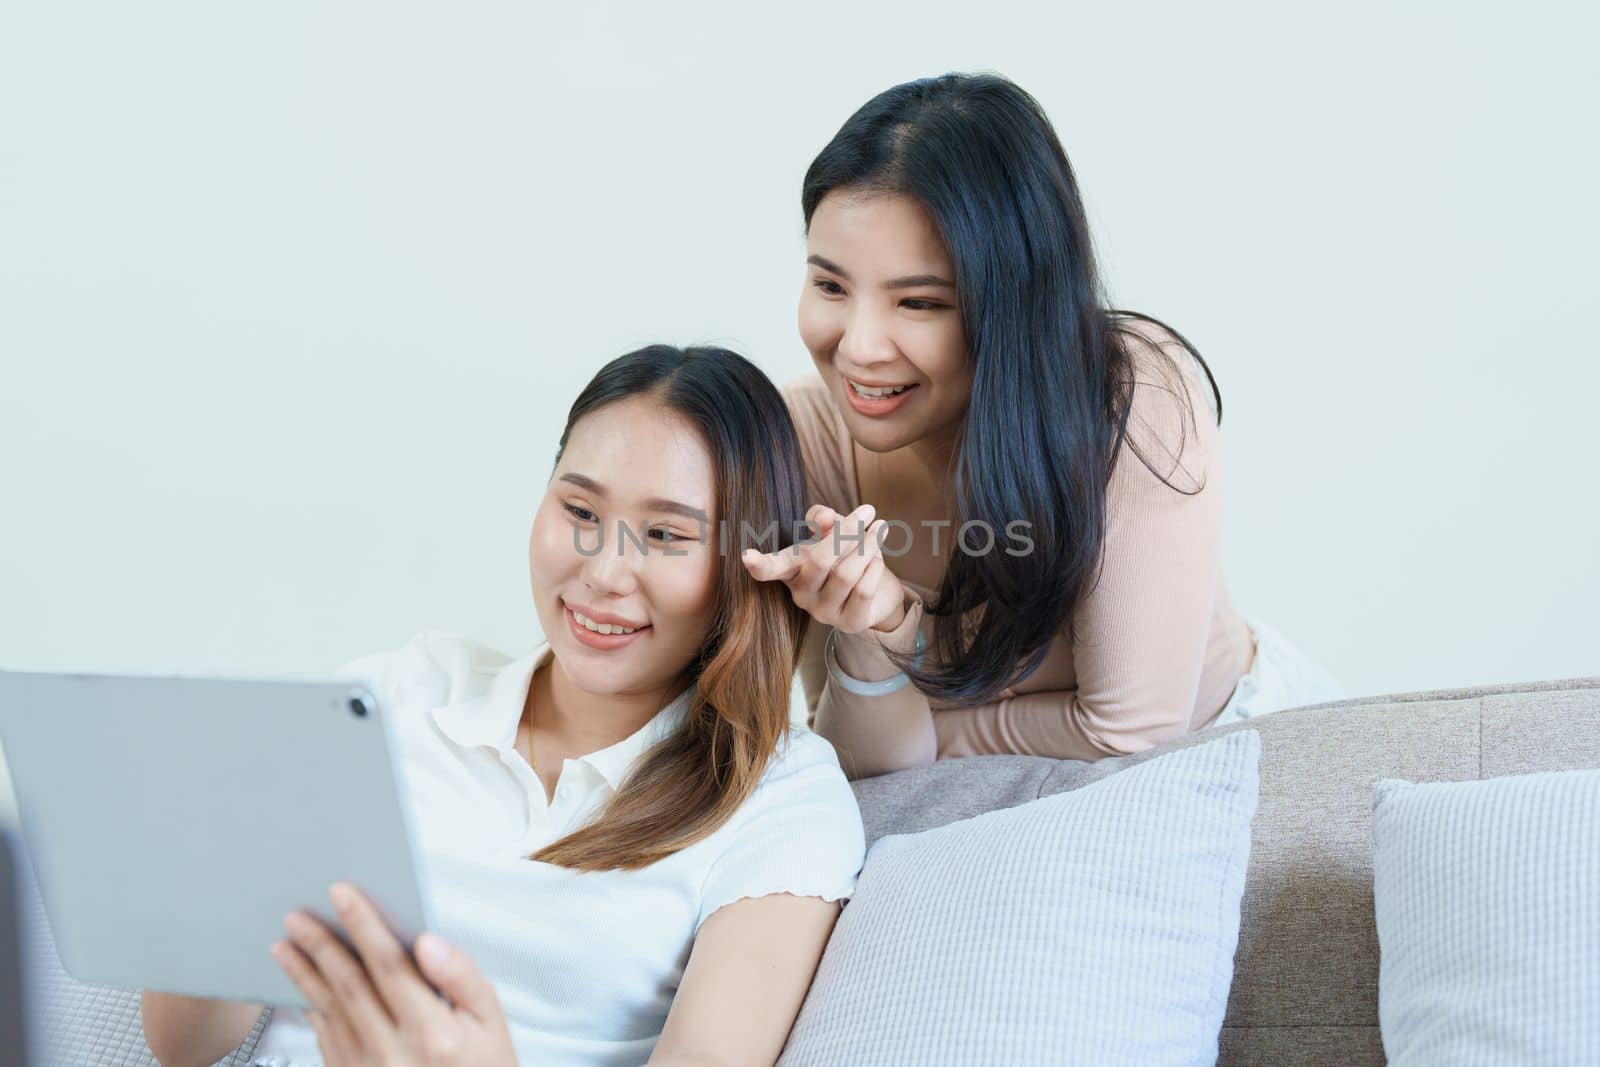 lgbtq, lgbt concept, homosexuality, portrait of two asian women posing happy together and loving each other while playing tablet at sofa.